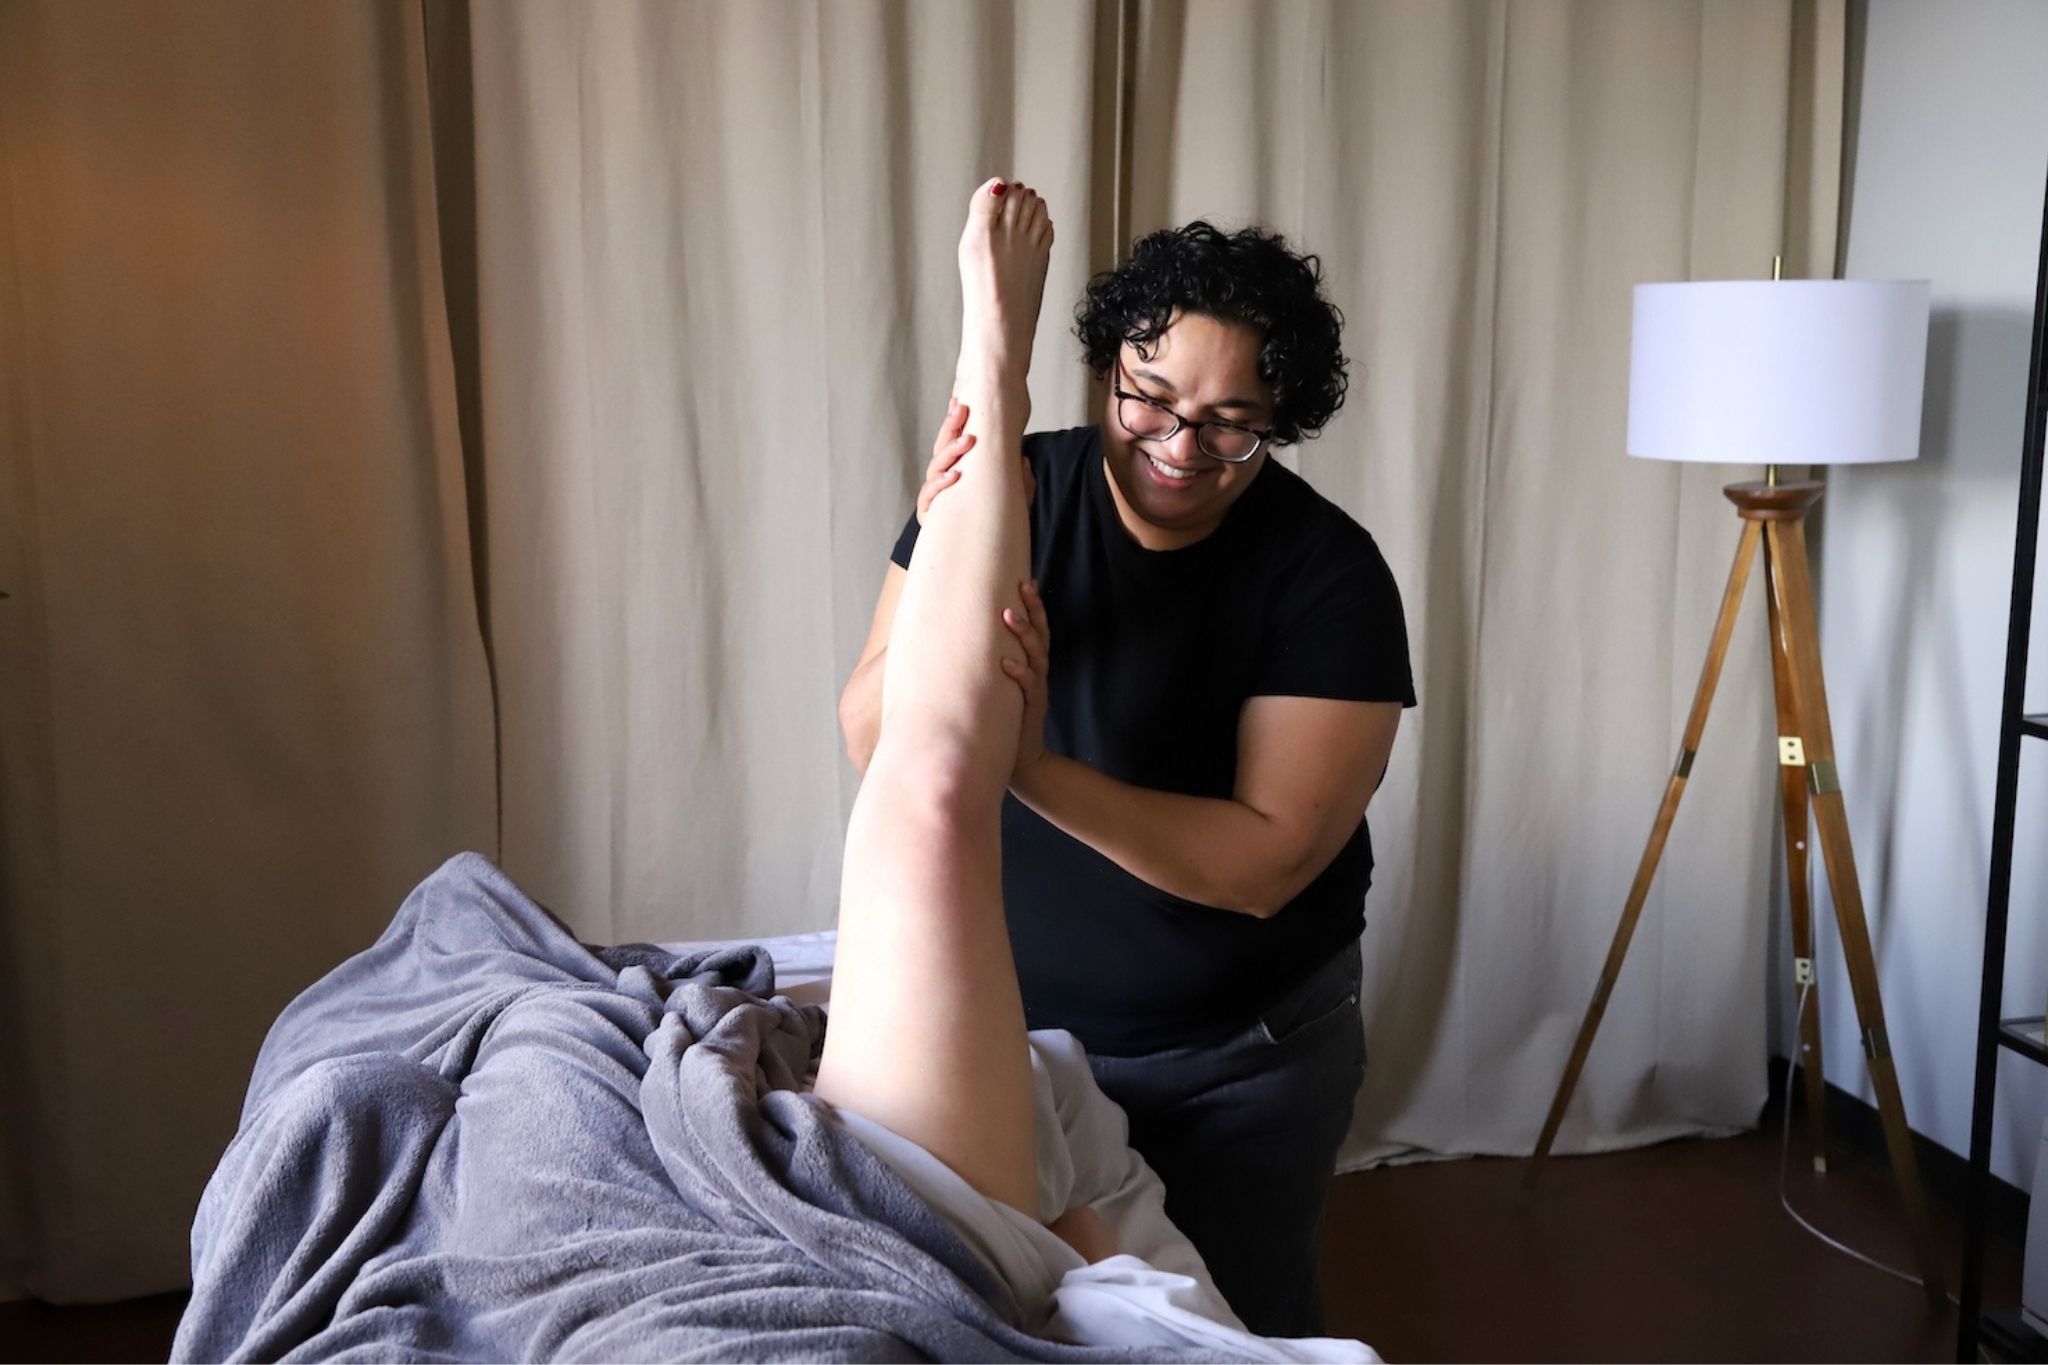 client having leg stretched during a sports massage